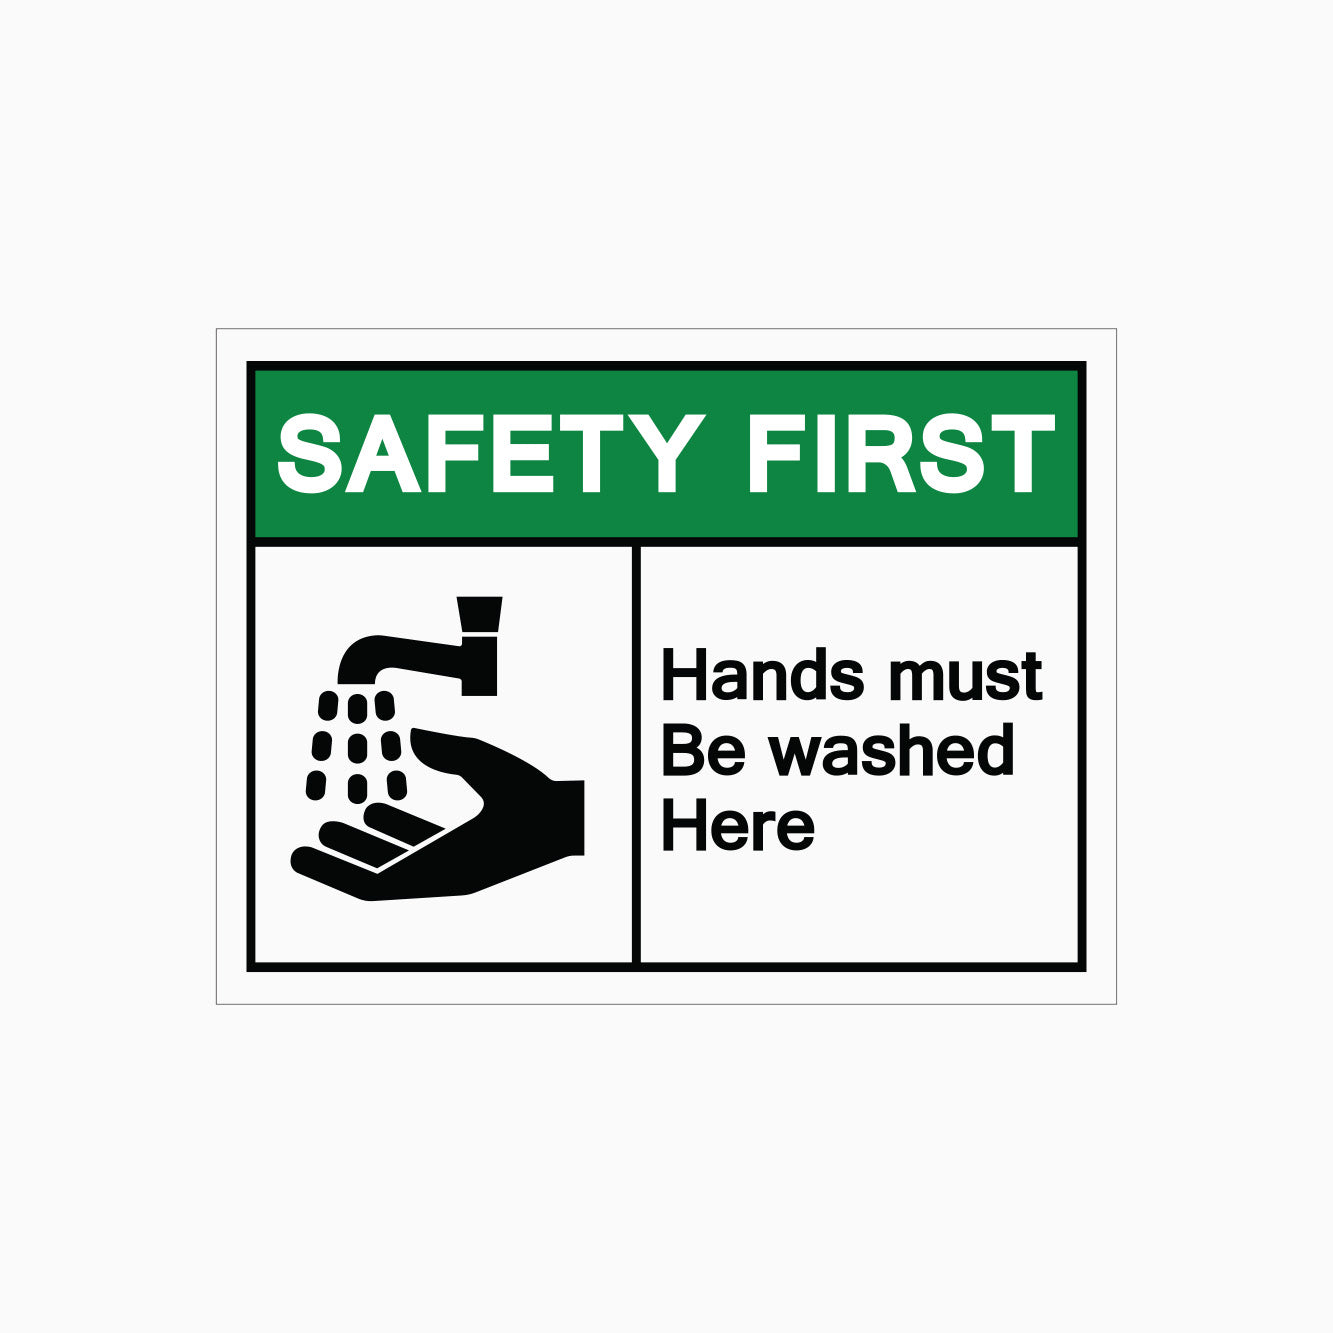 SAFETY FIRST SIGN - HANDS MUST BE WASHED HERE SIGN